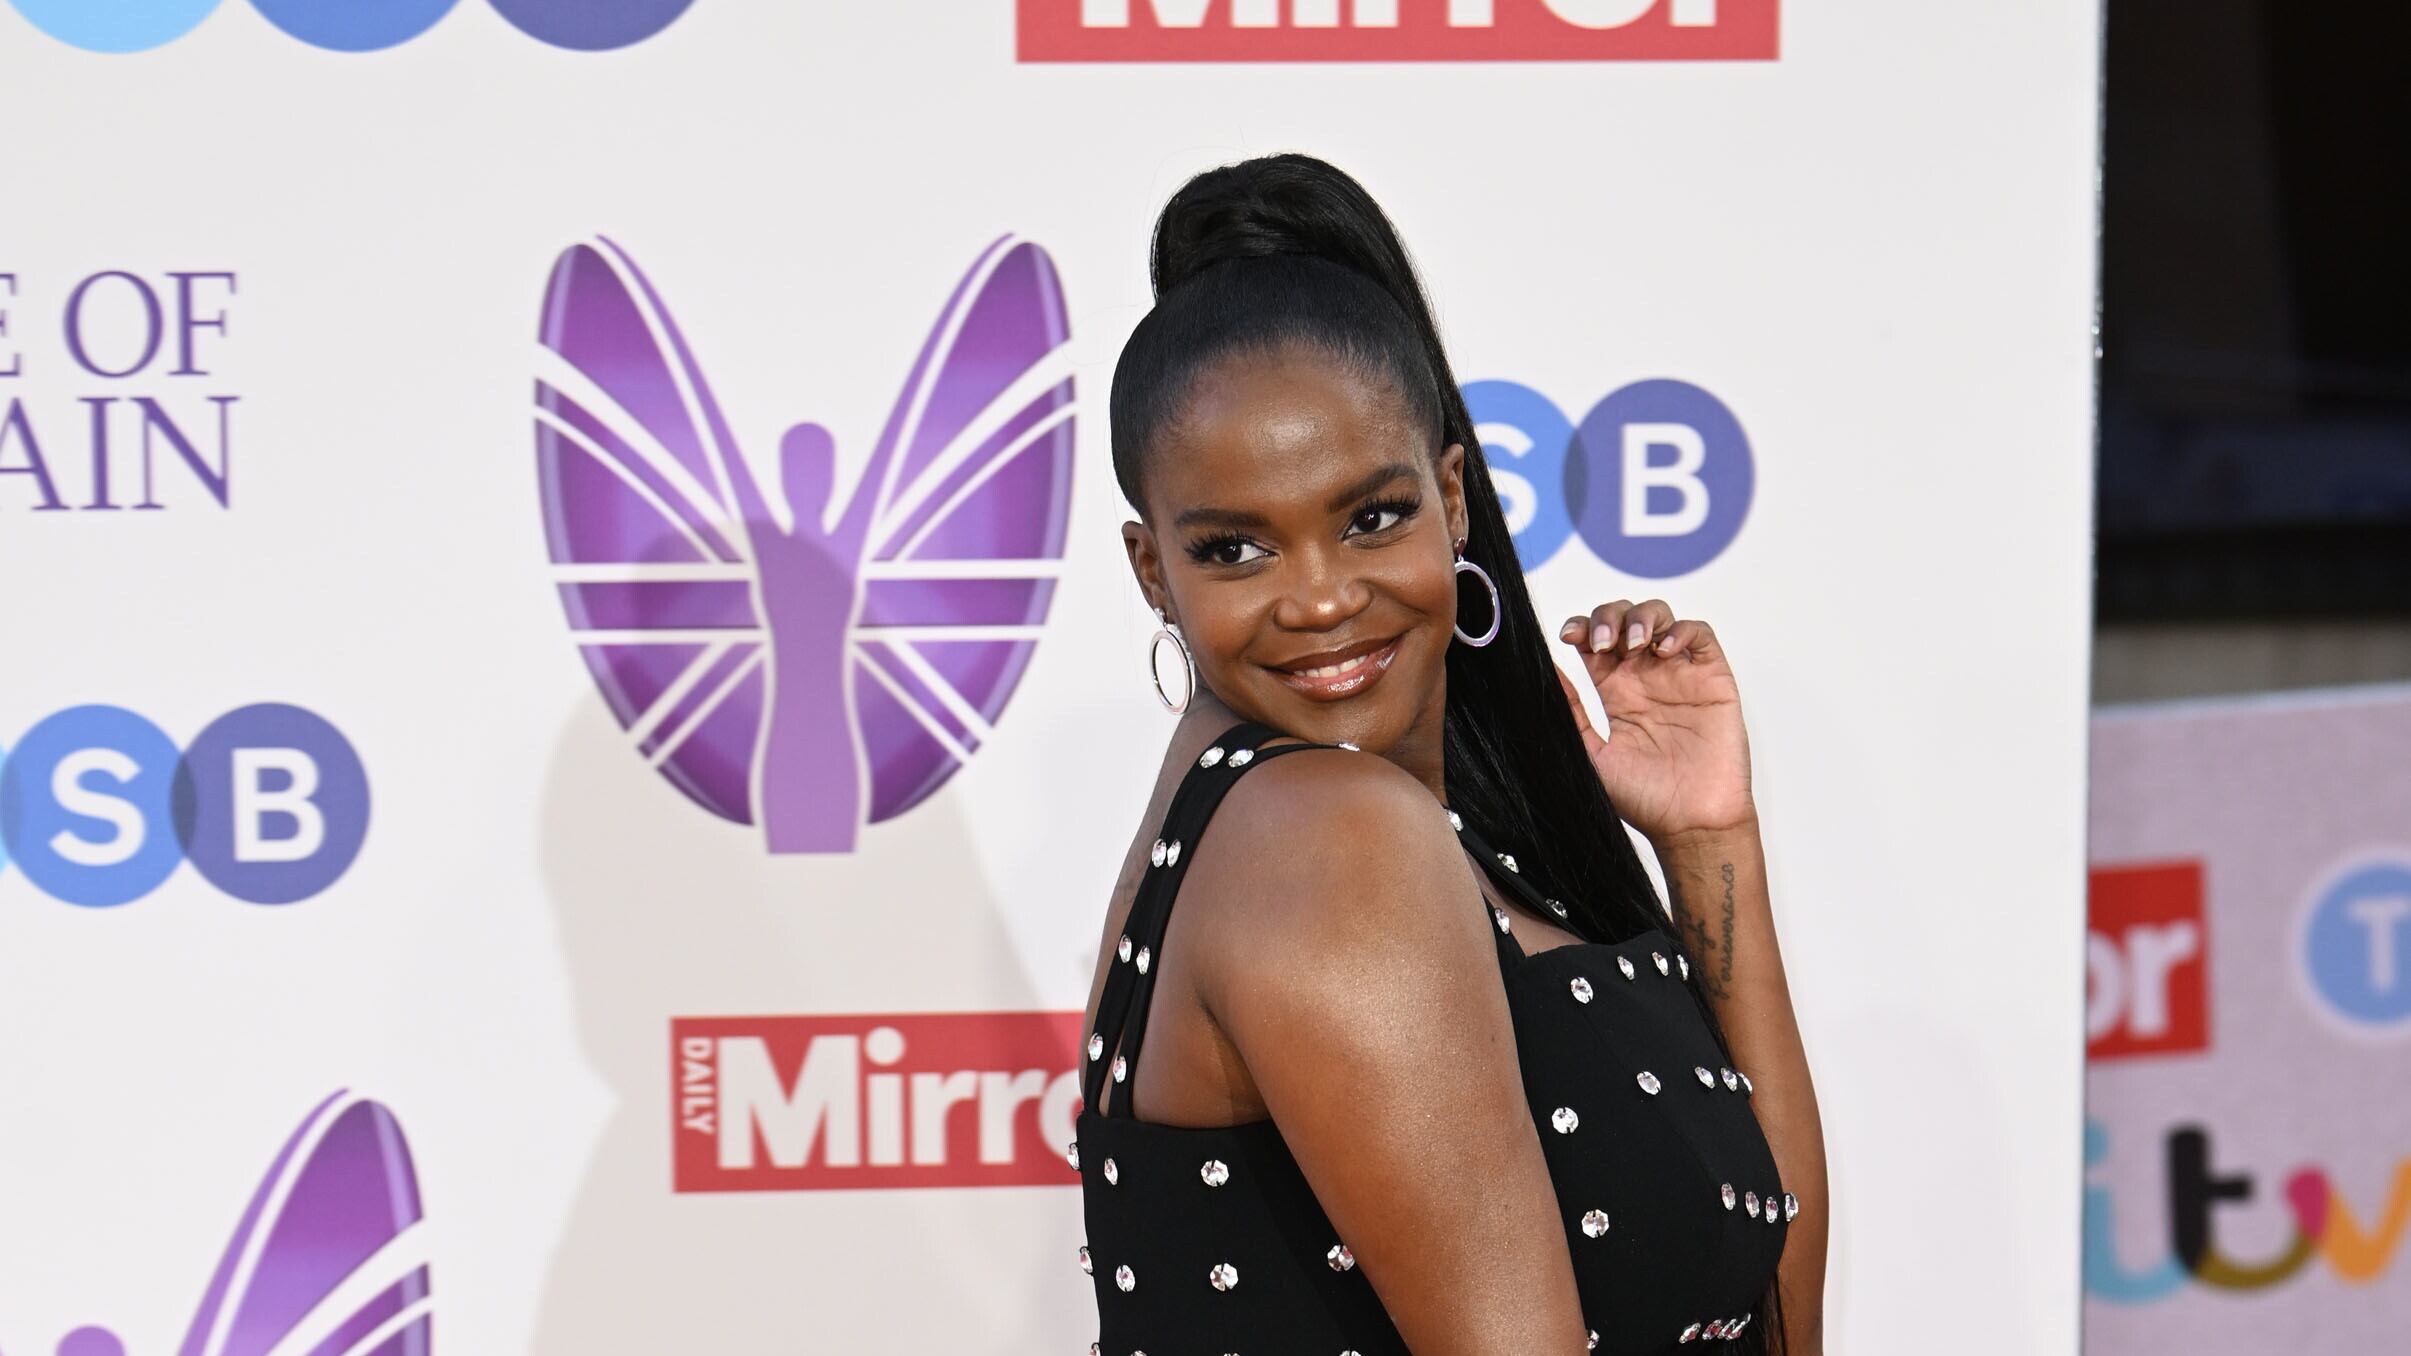 Oti Mabuse arrives for the Pride of Britain Awards at the Grosvenor House Hotel, London (Doug Peters/PA)